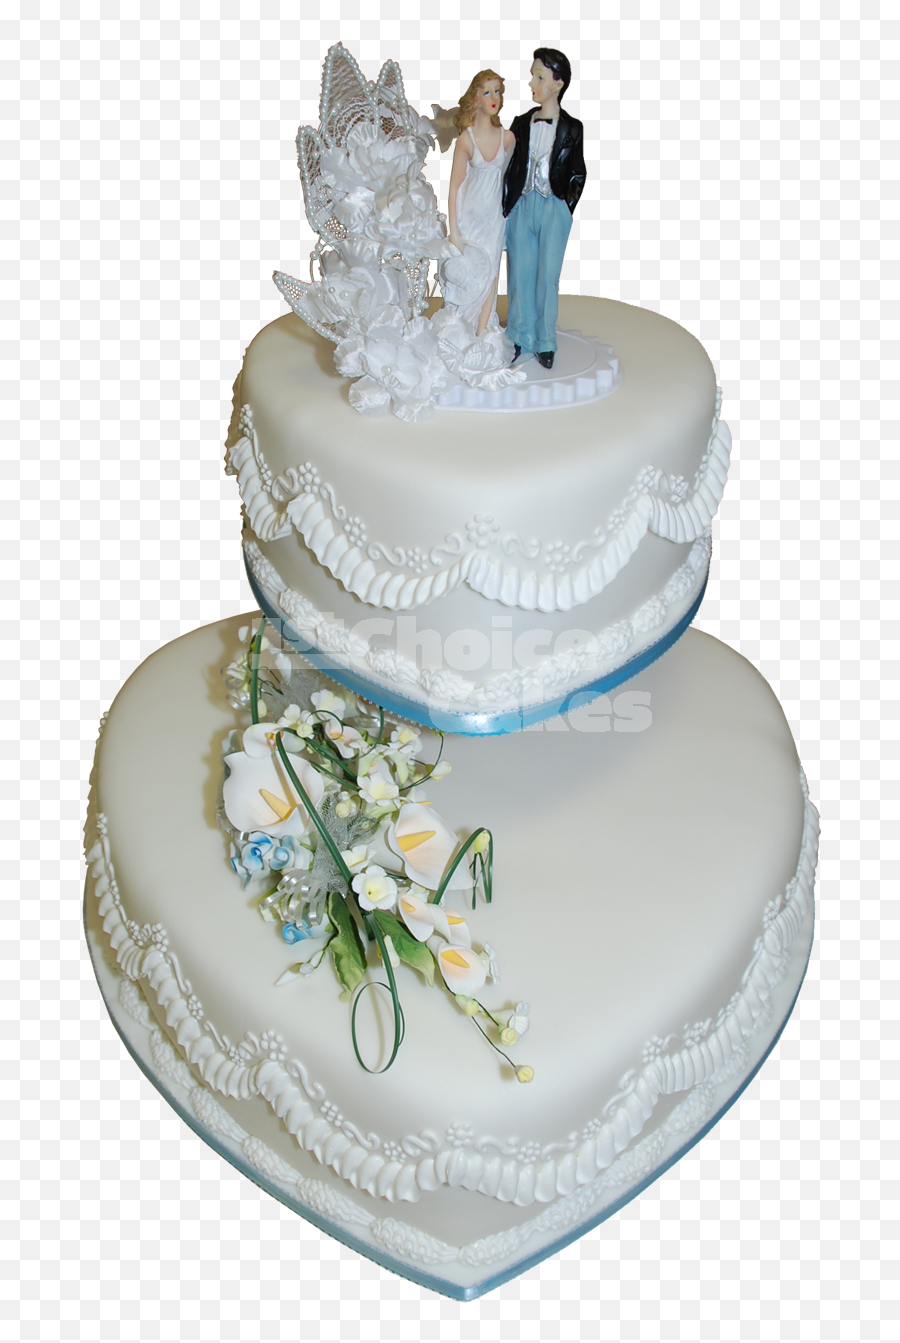 Wedding Cake Png Hd All - Wedding Cakes Photos Hd,Pasteles Png